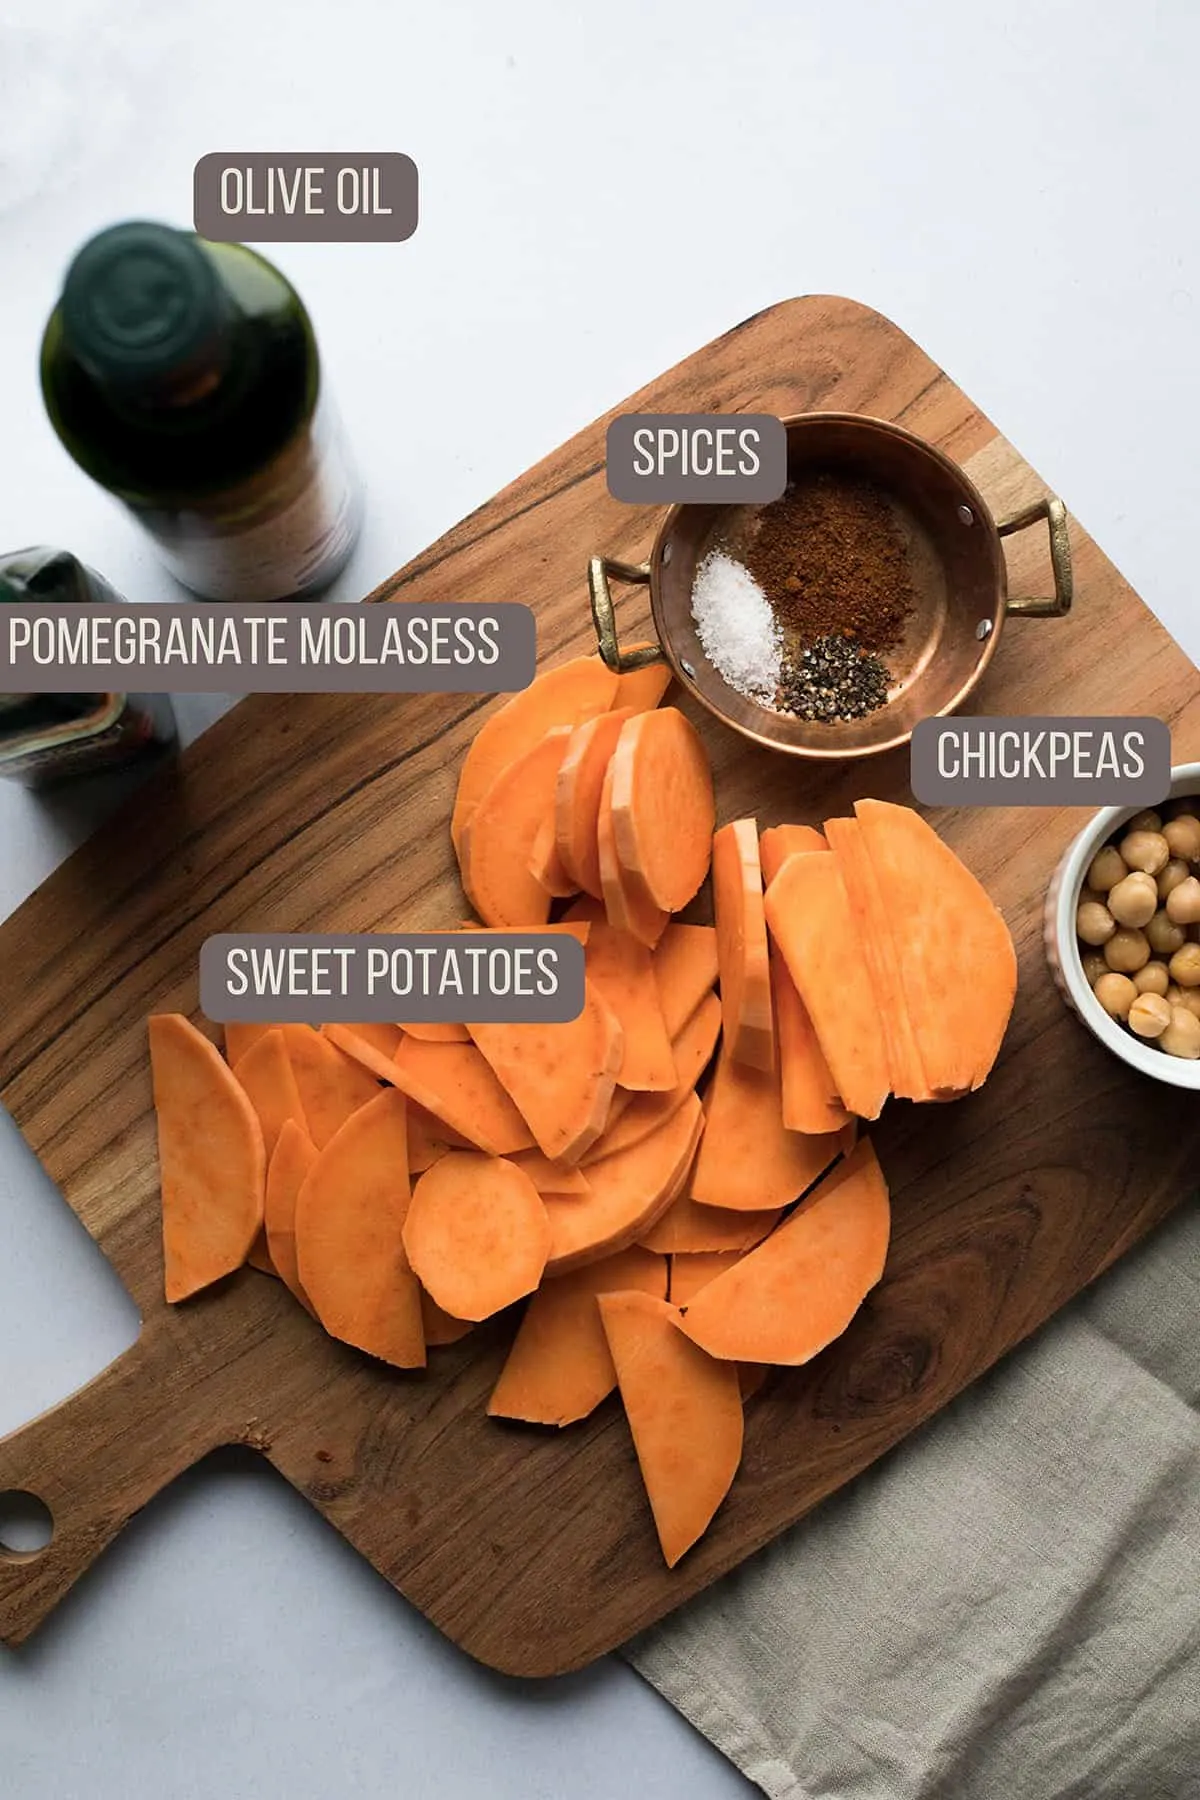 Ingredients for the sweet potatoes.